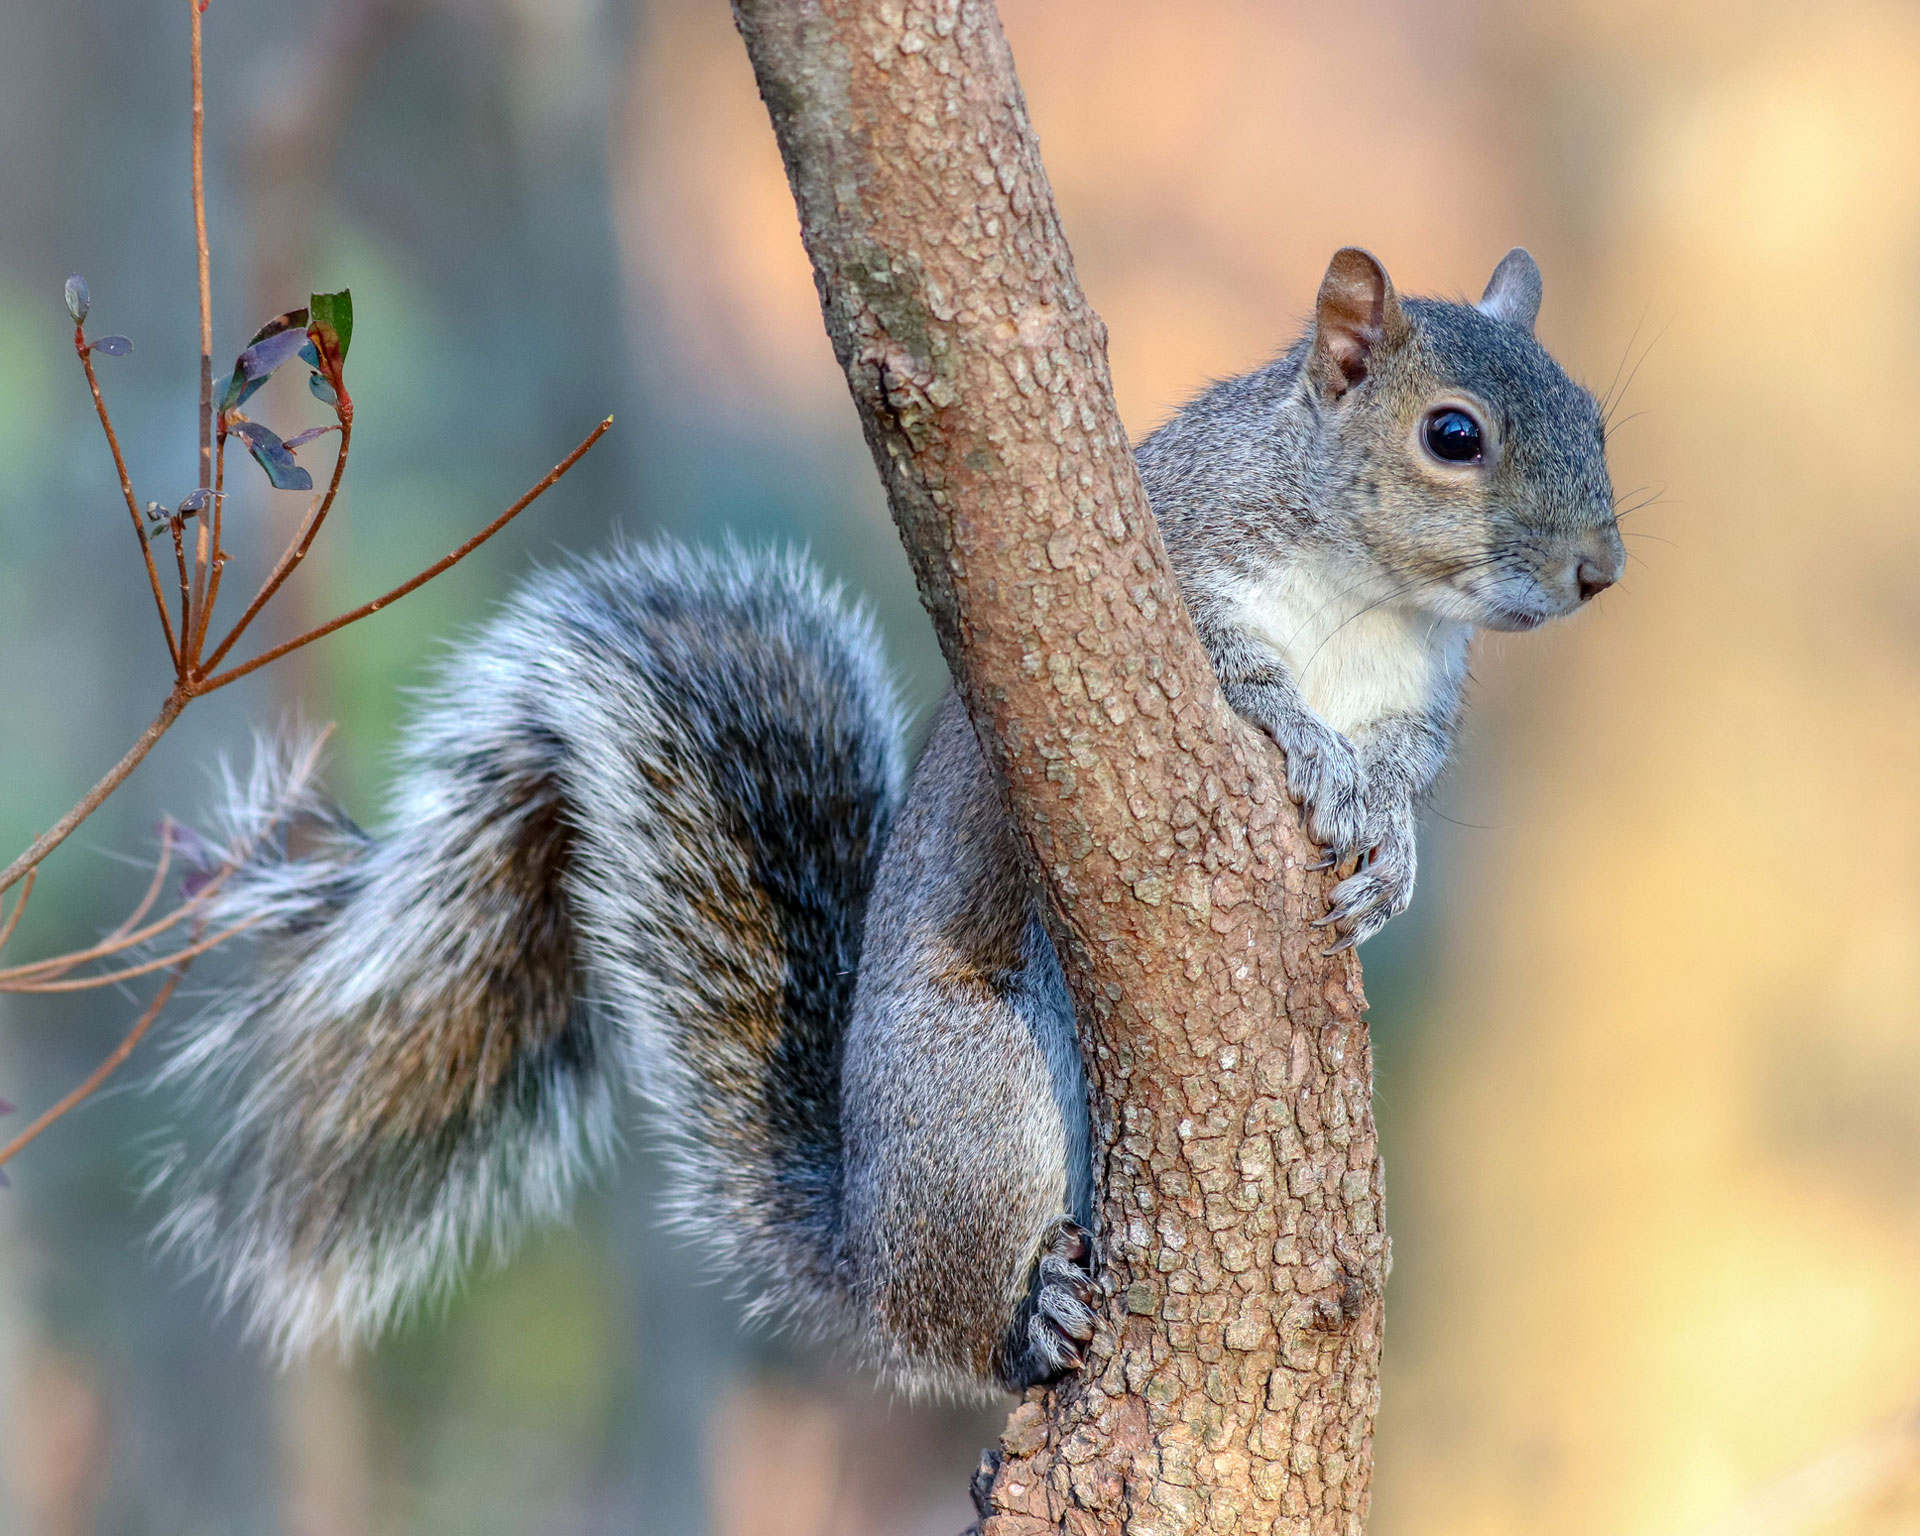 A small gray squirrel hands onto a thin tree branch, inquisitively looking around.